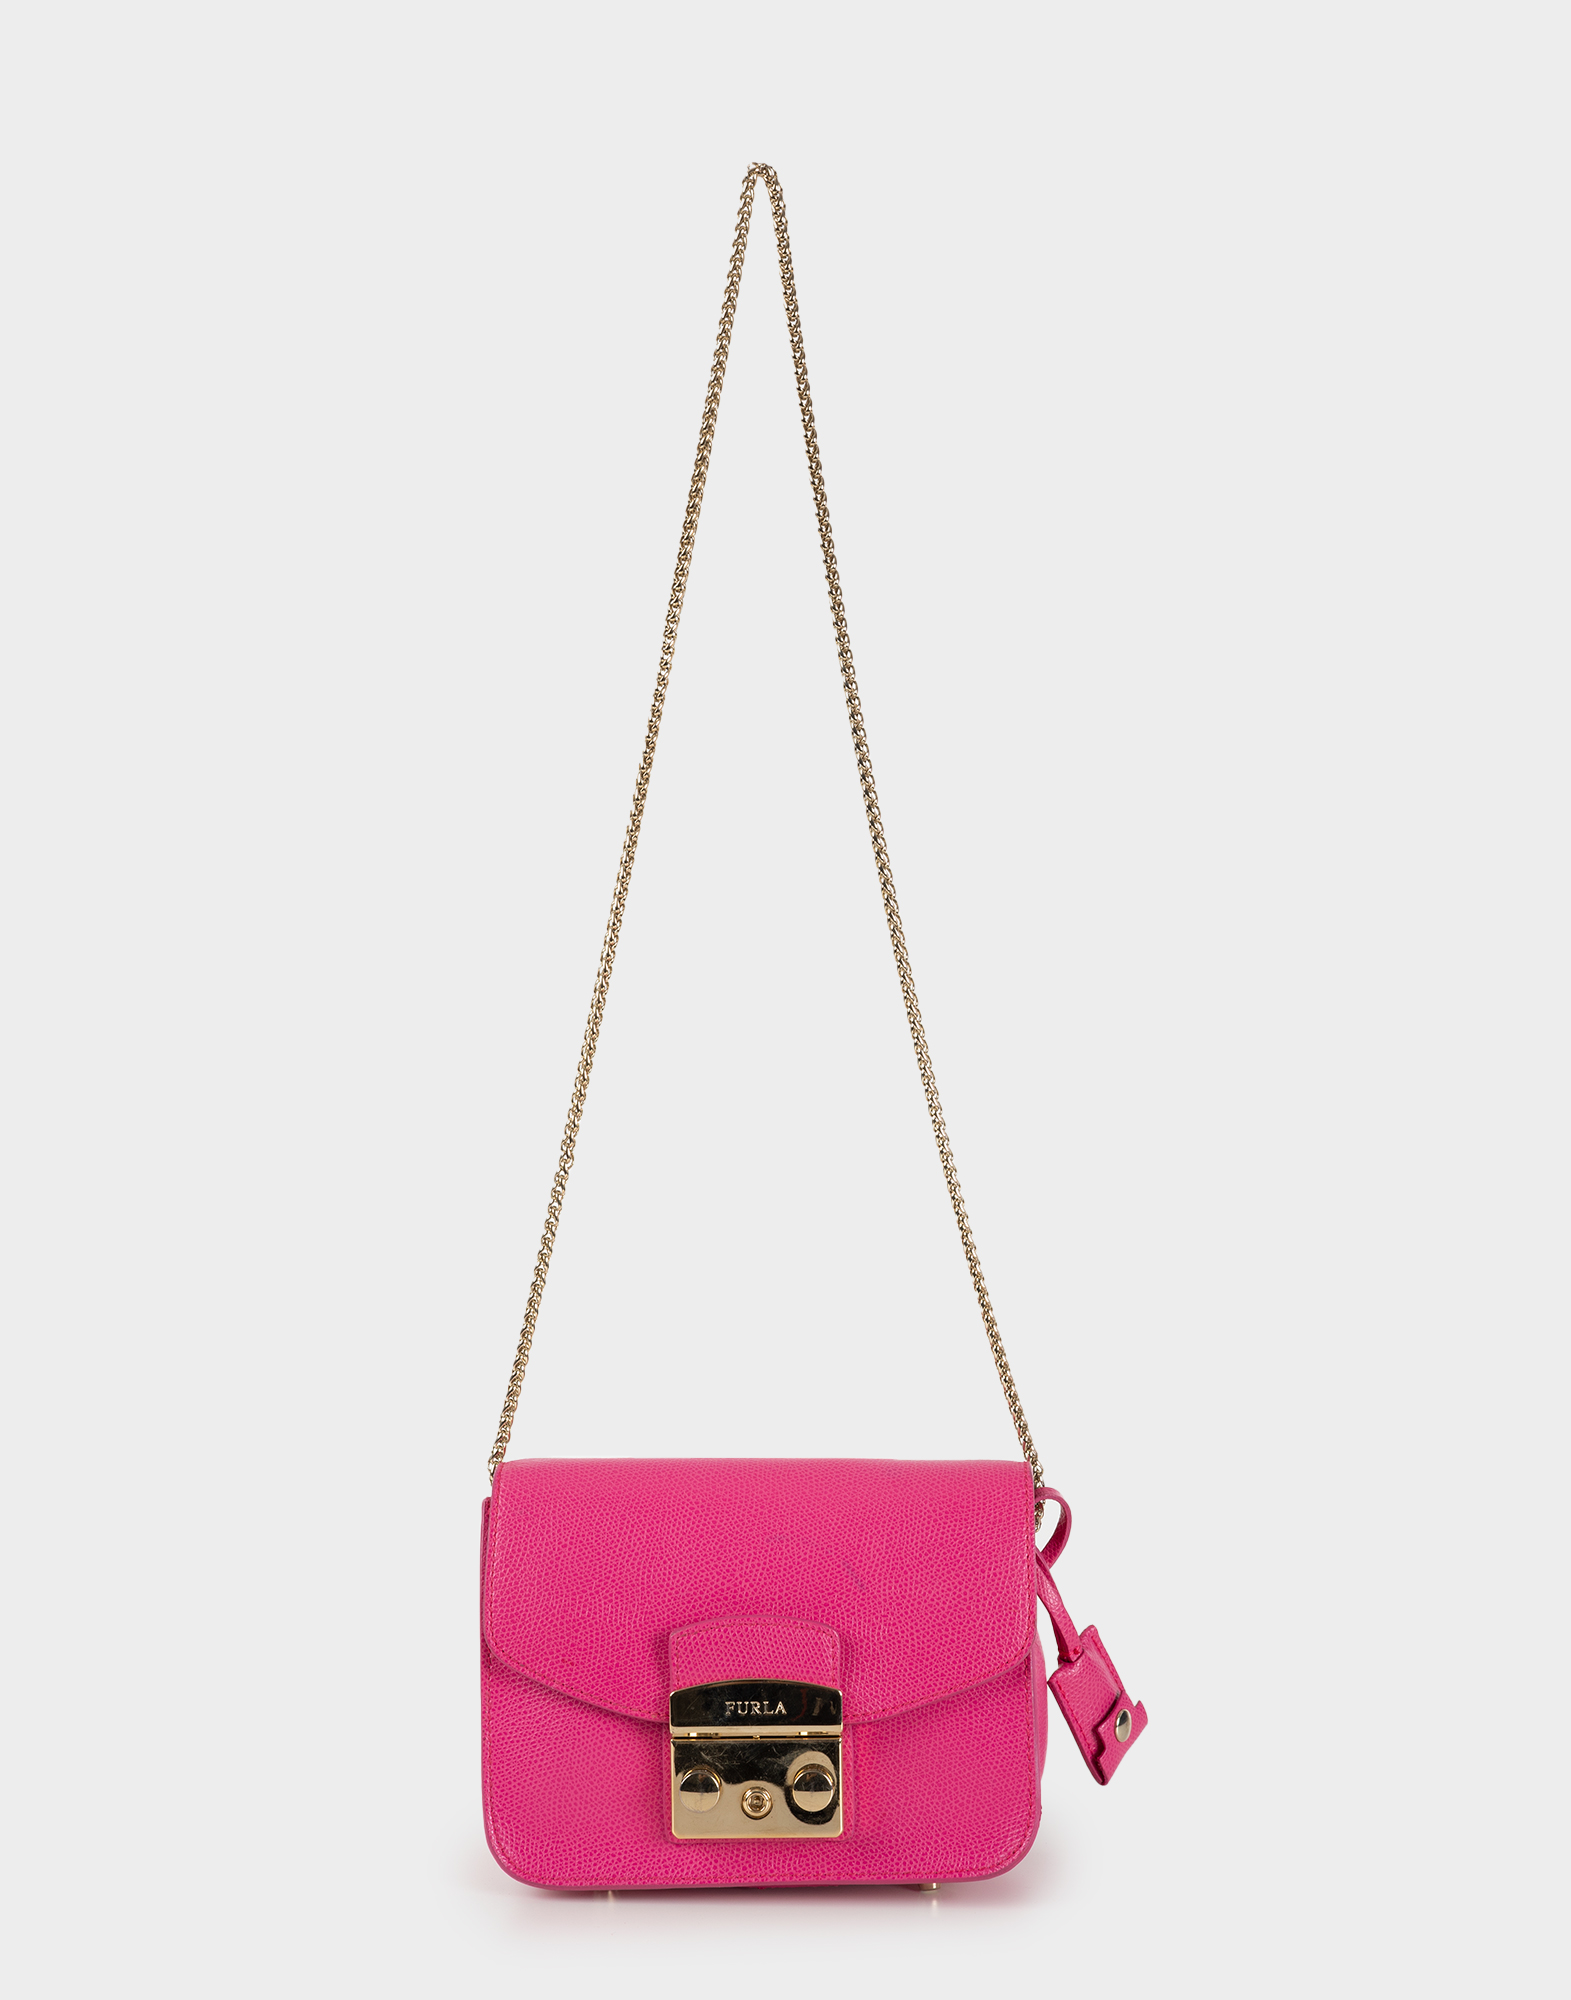 Small fuchsia bag with long gold metal chain